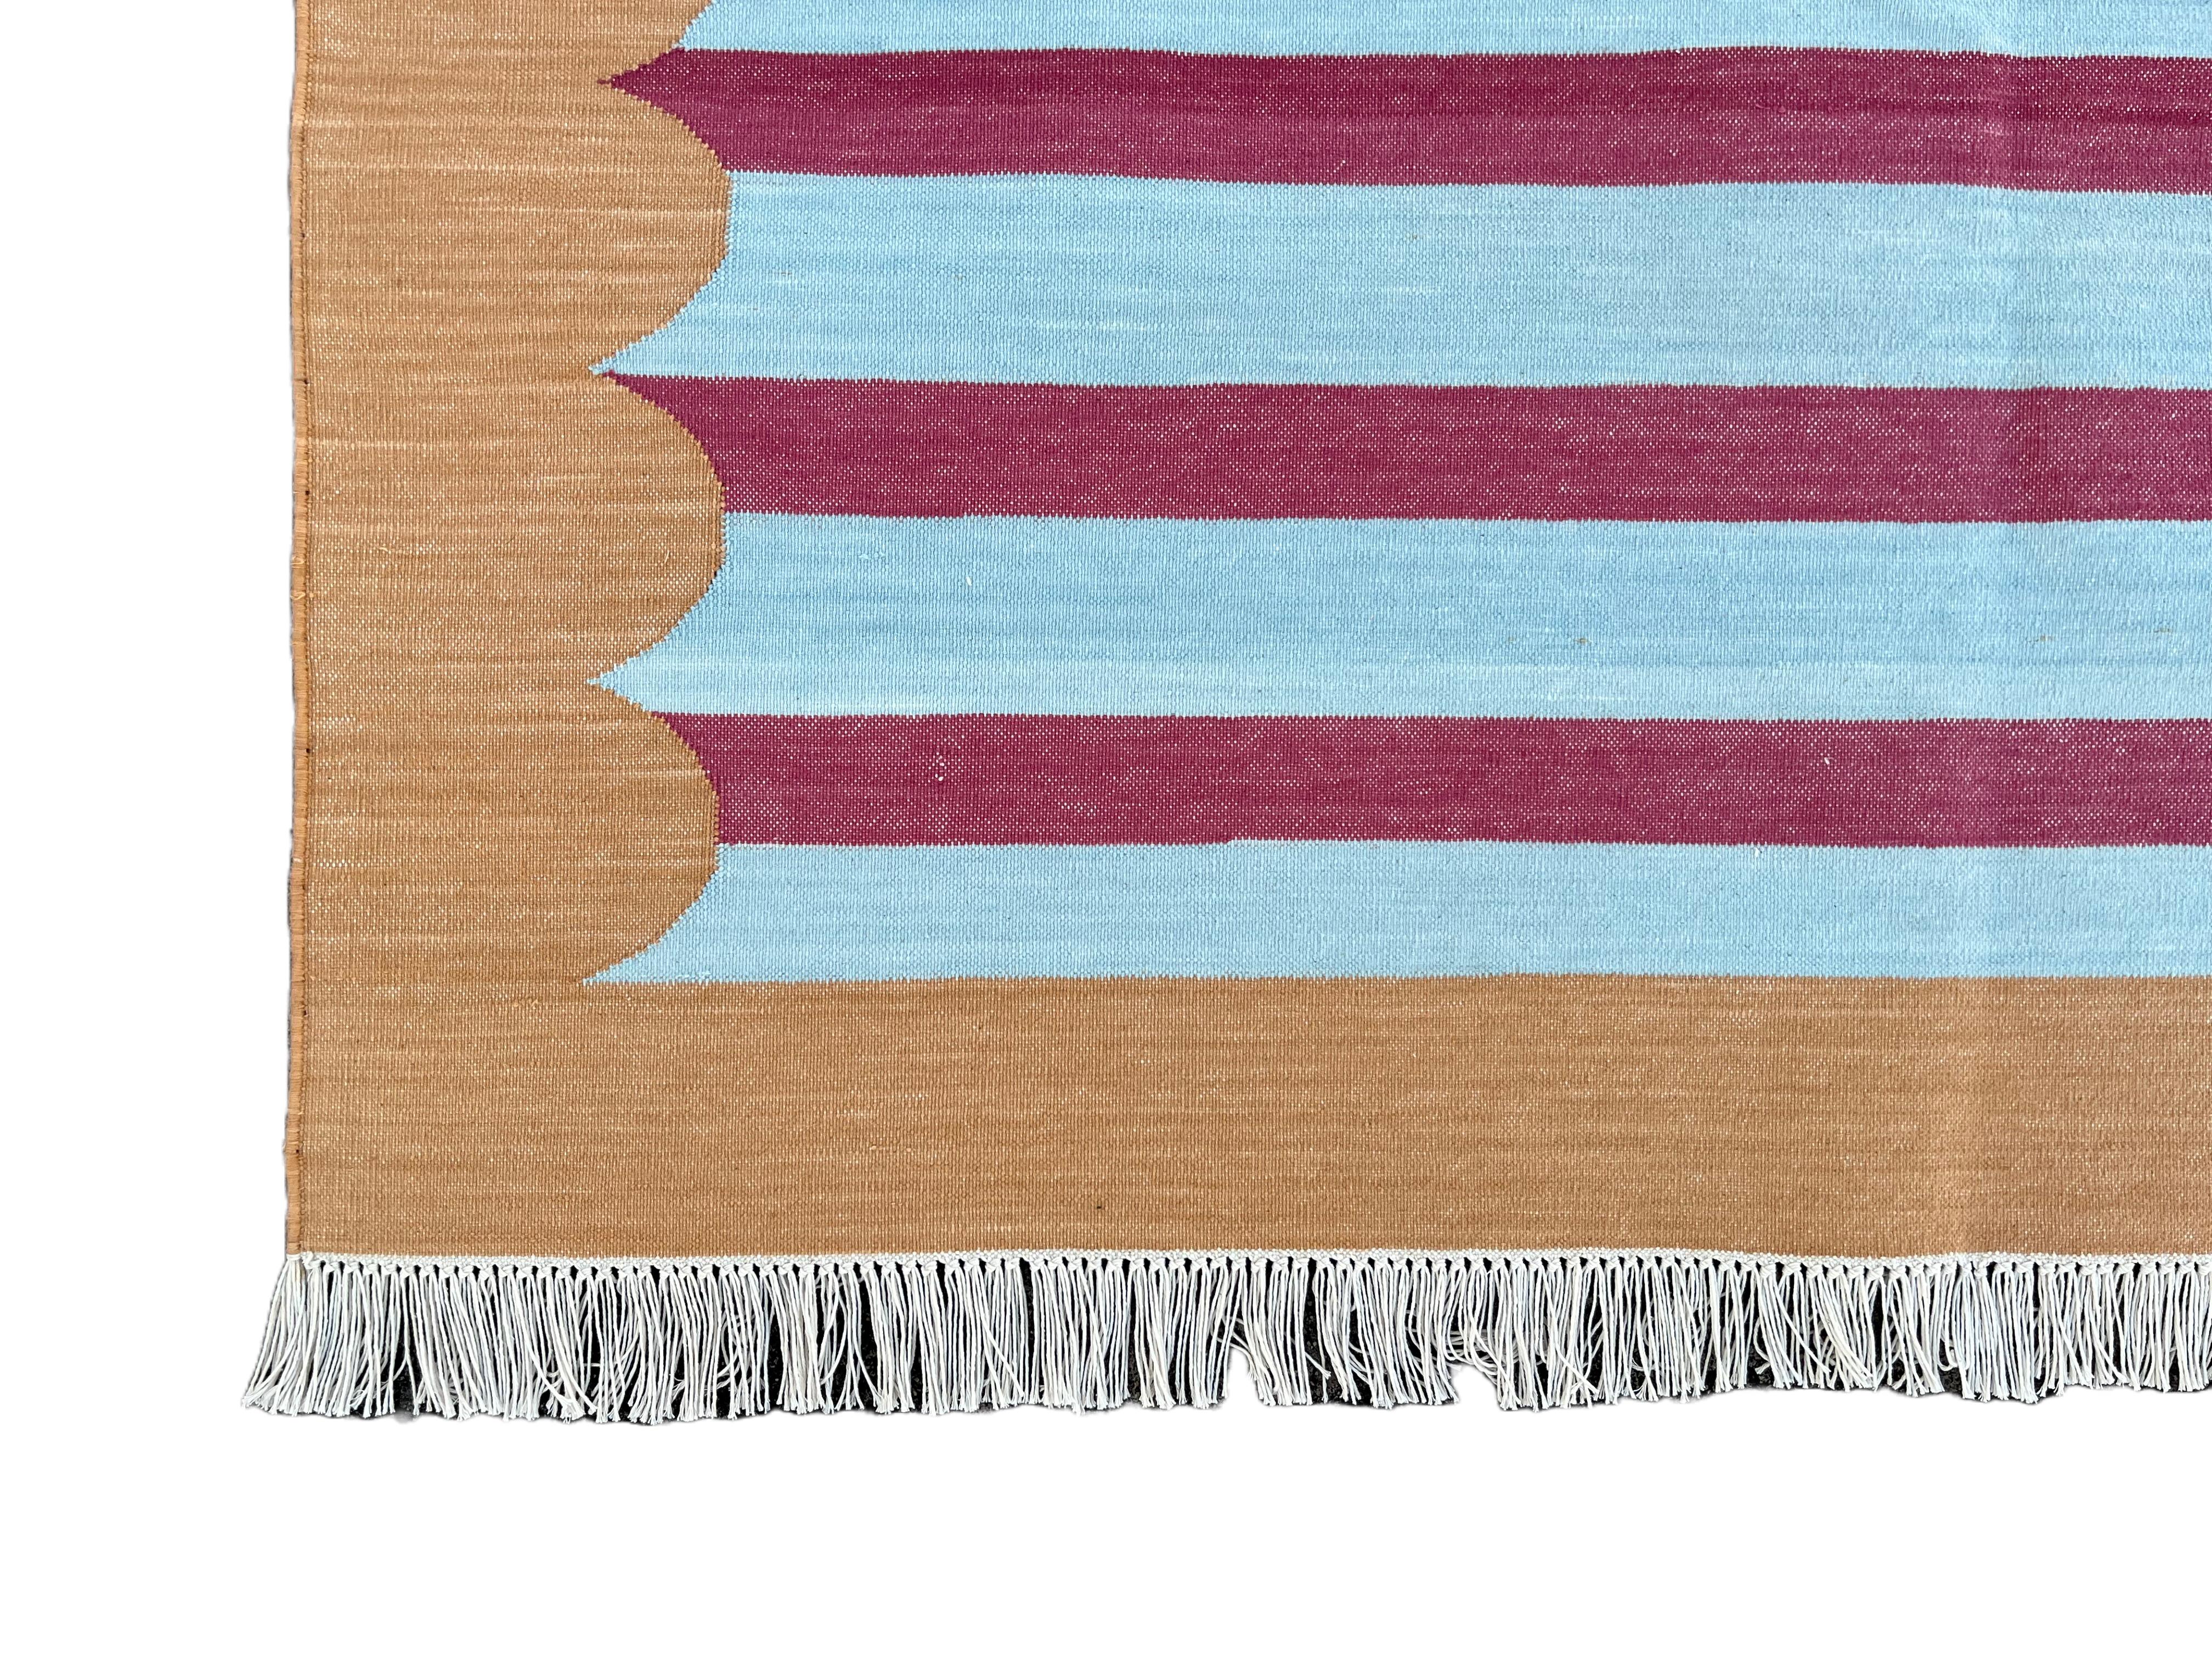 Handmade Cotton Area Flat Weave Rug, 8x10 Blue, Tan, Pink Striped Indian Dhurrie For Sale 4